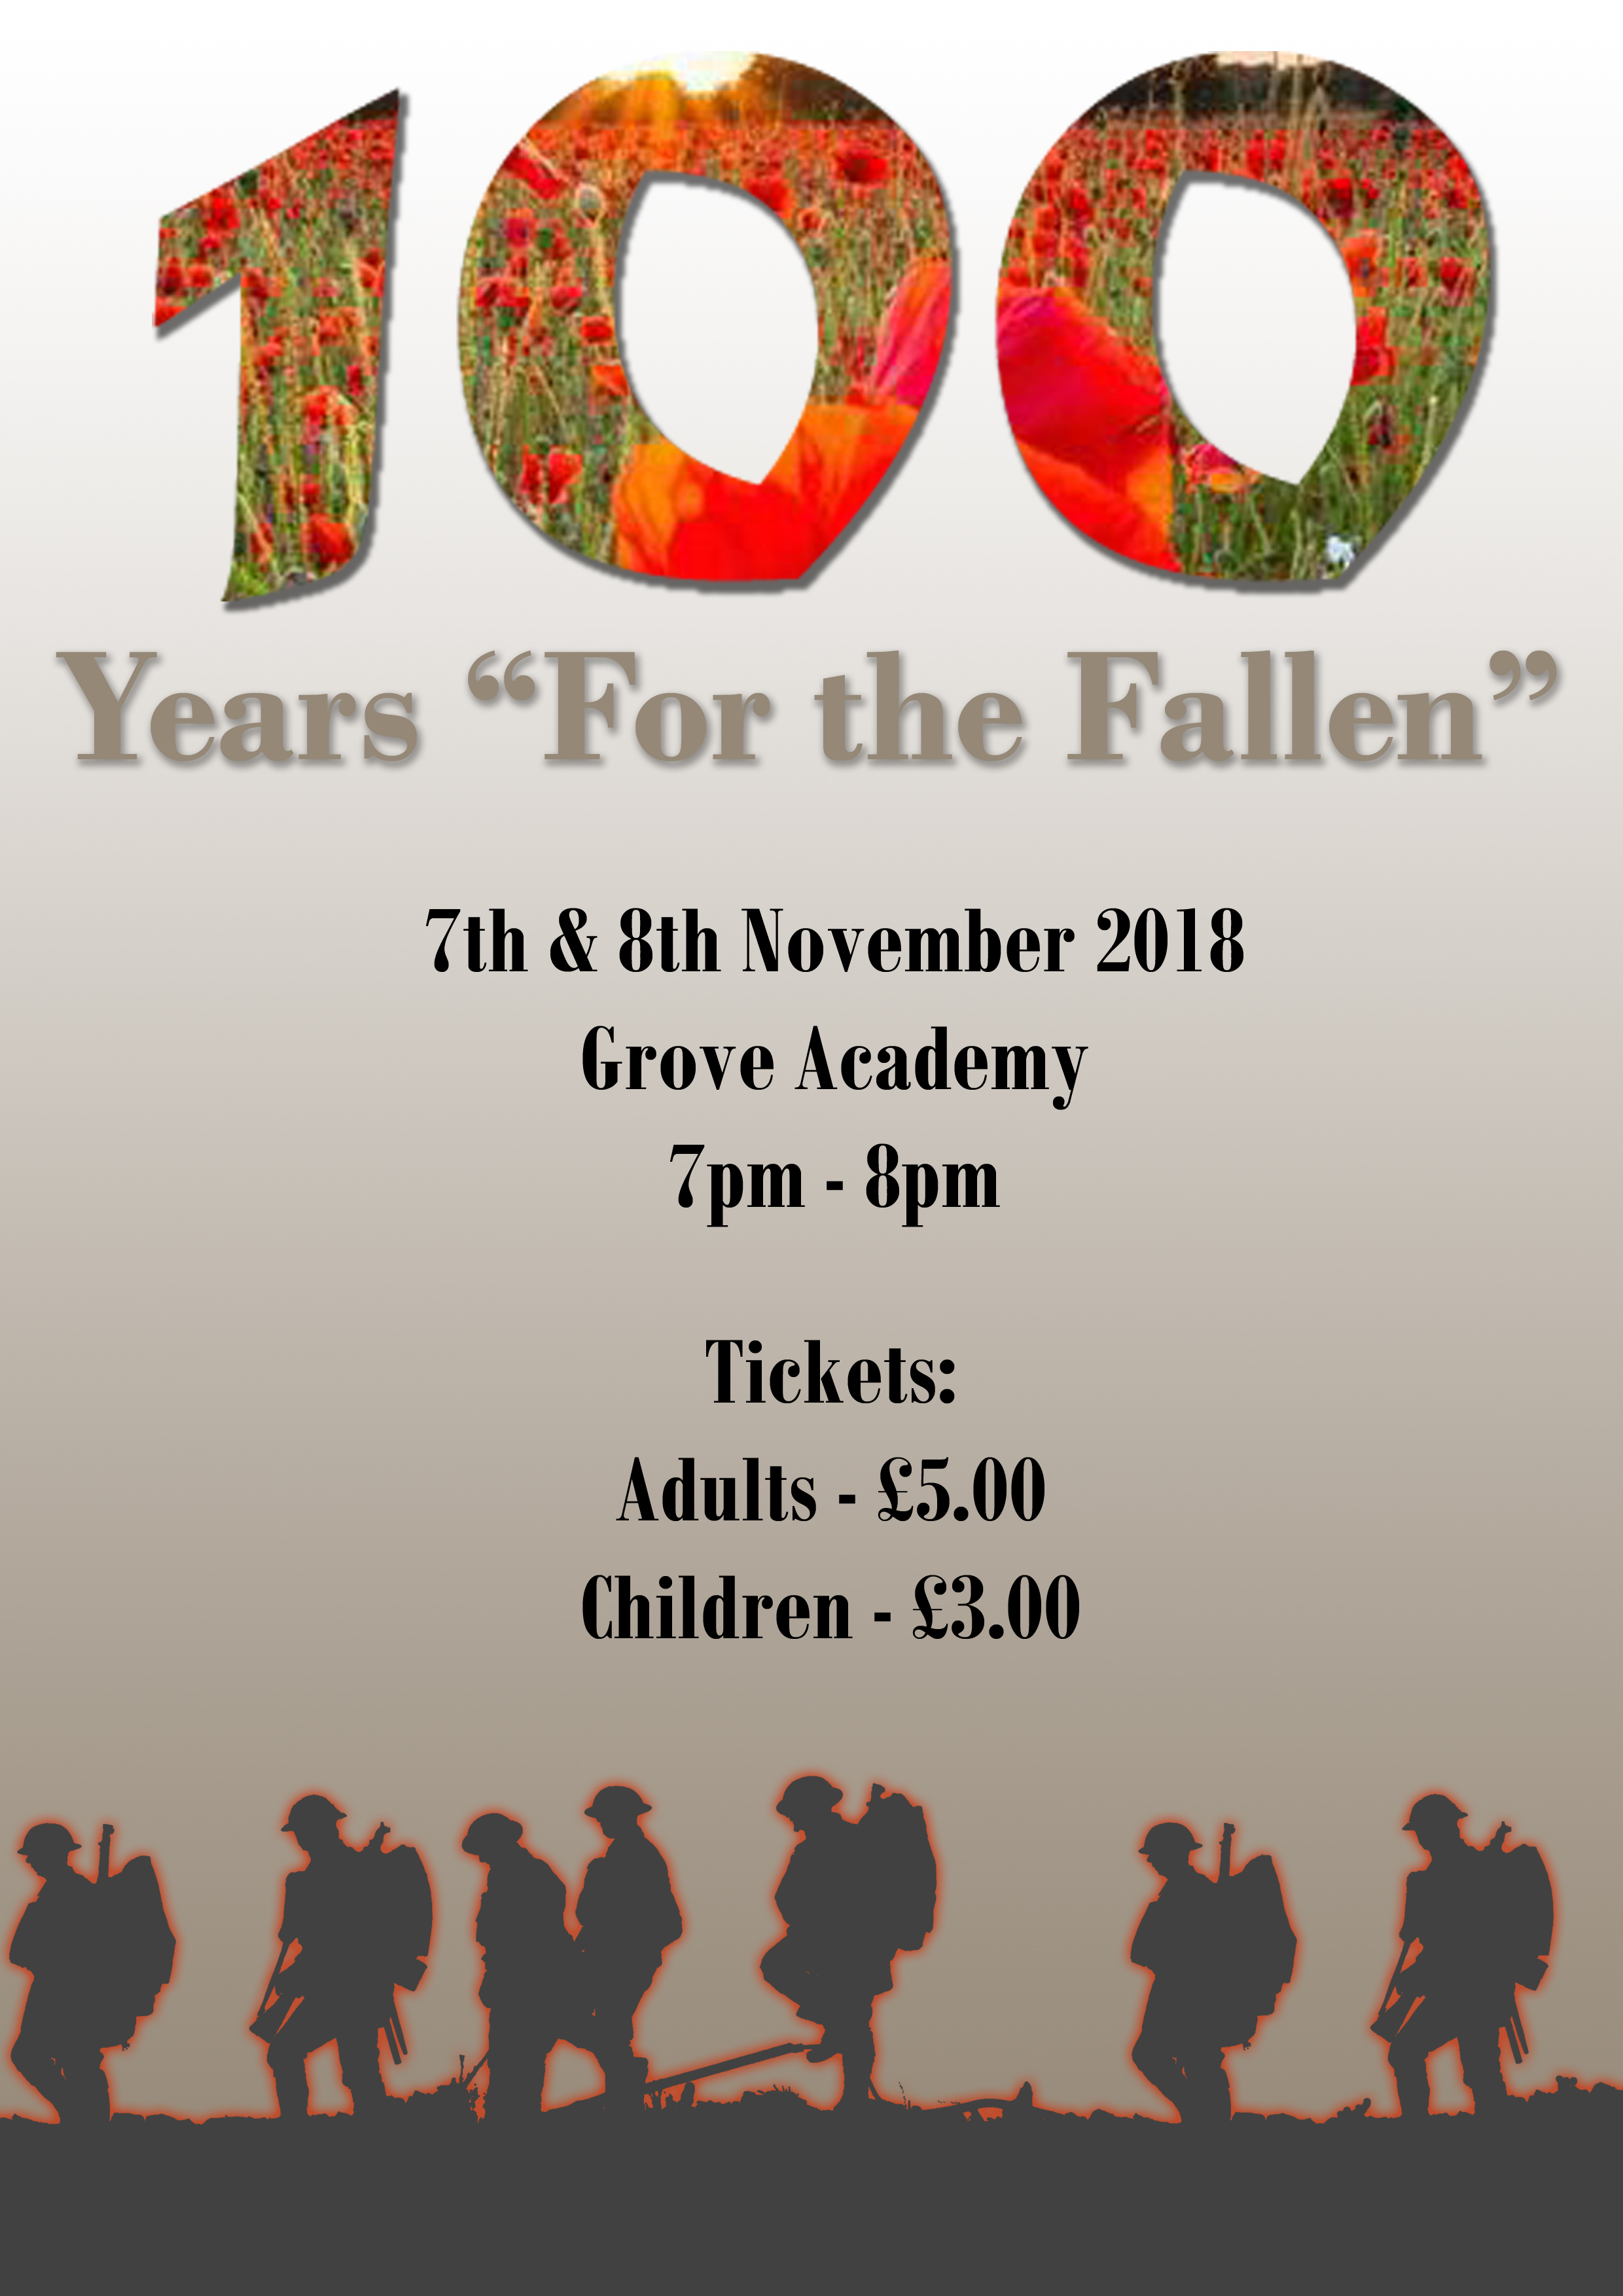 For the fallen 2018